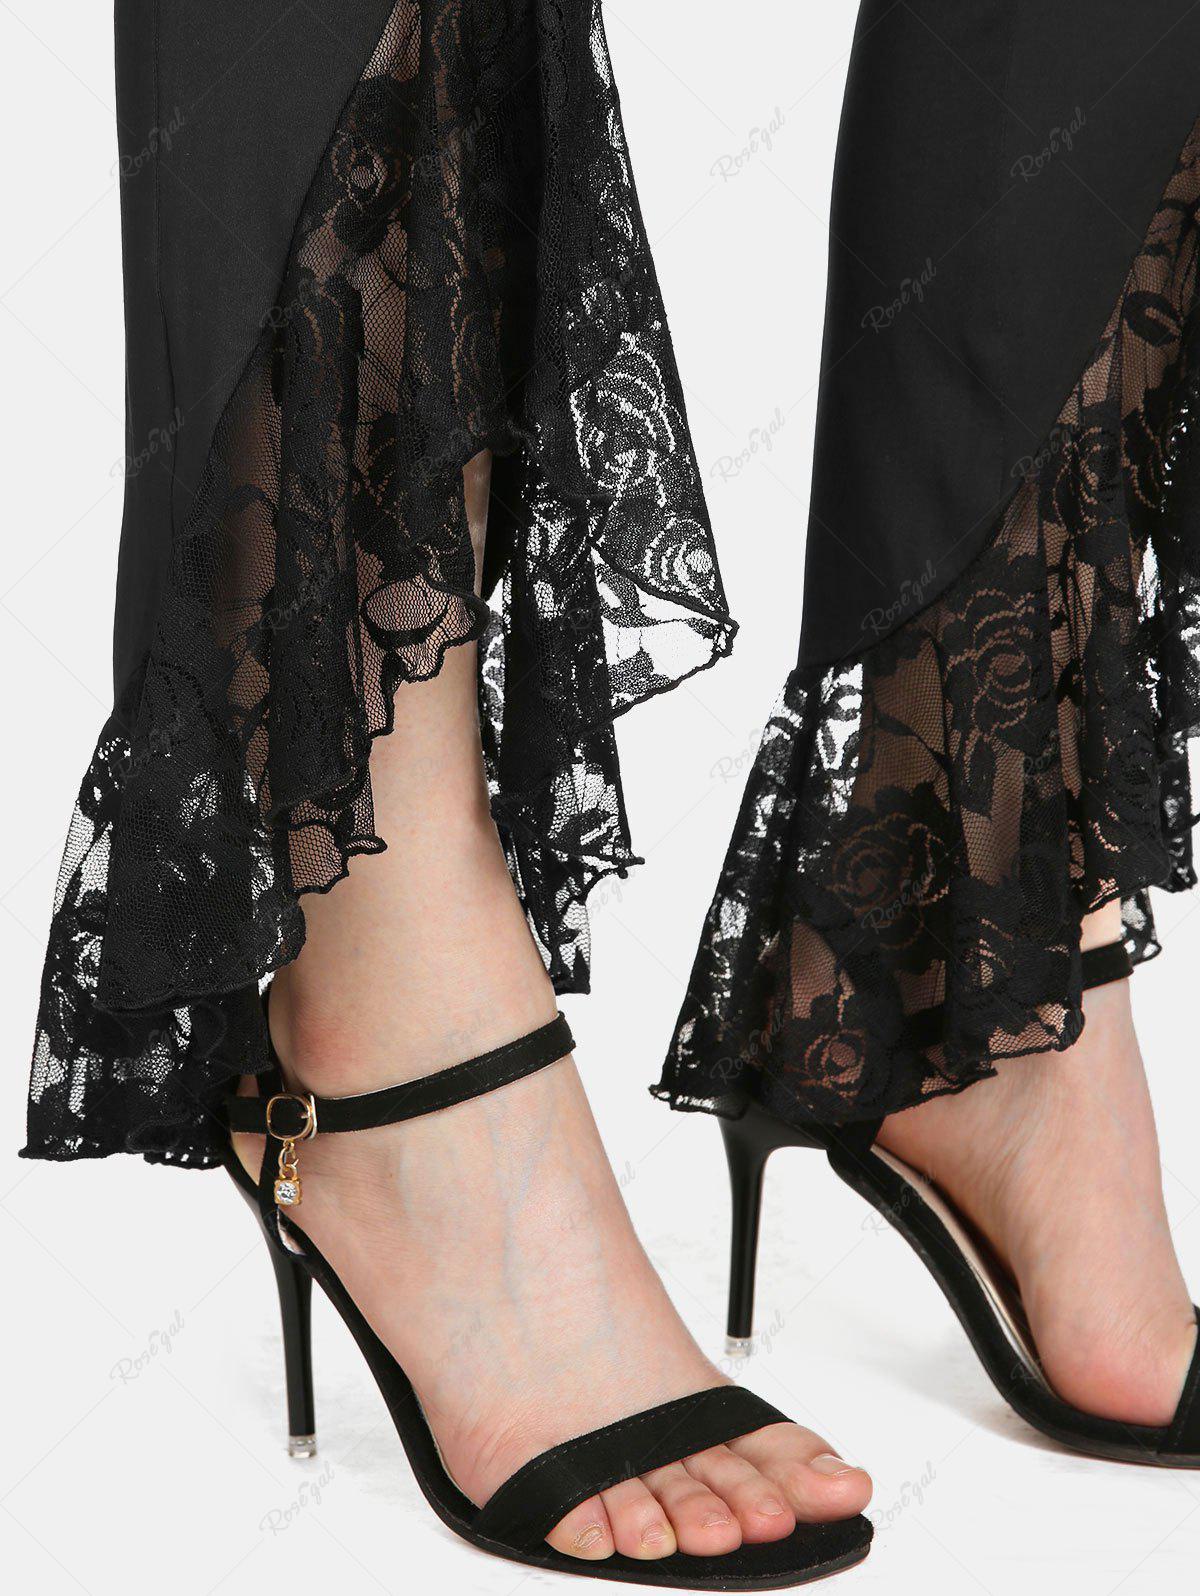 Gothic Lace Panel Slit High Rise Flare Pants